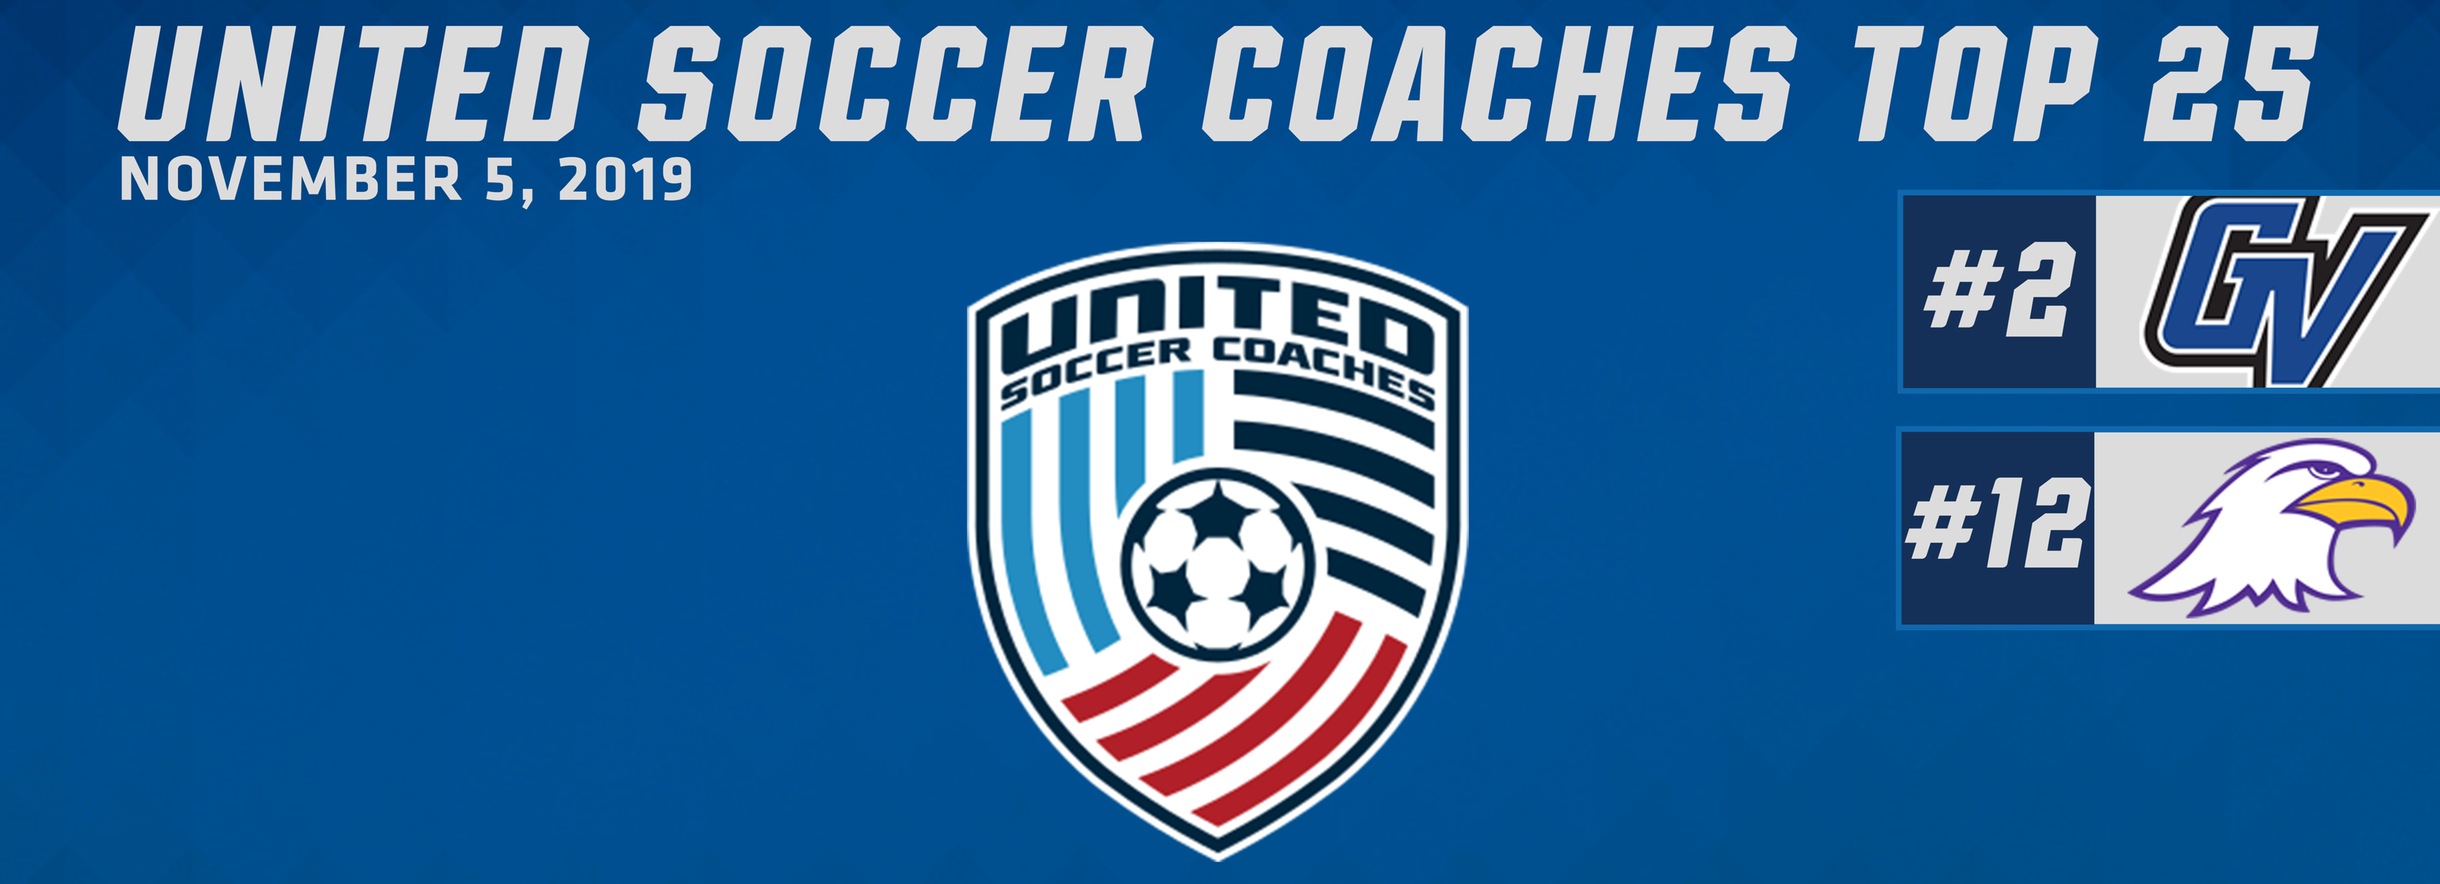 Grand Valley St. 2nd, Ashland 12th In United Soccer Coaches Poll